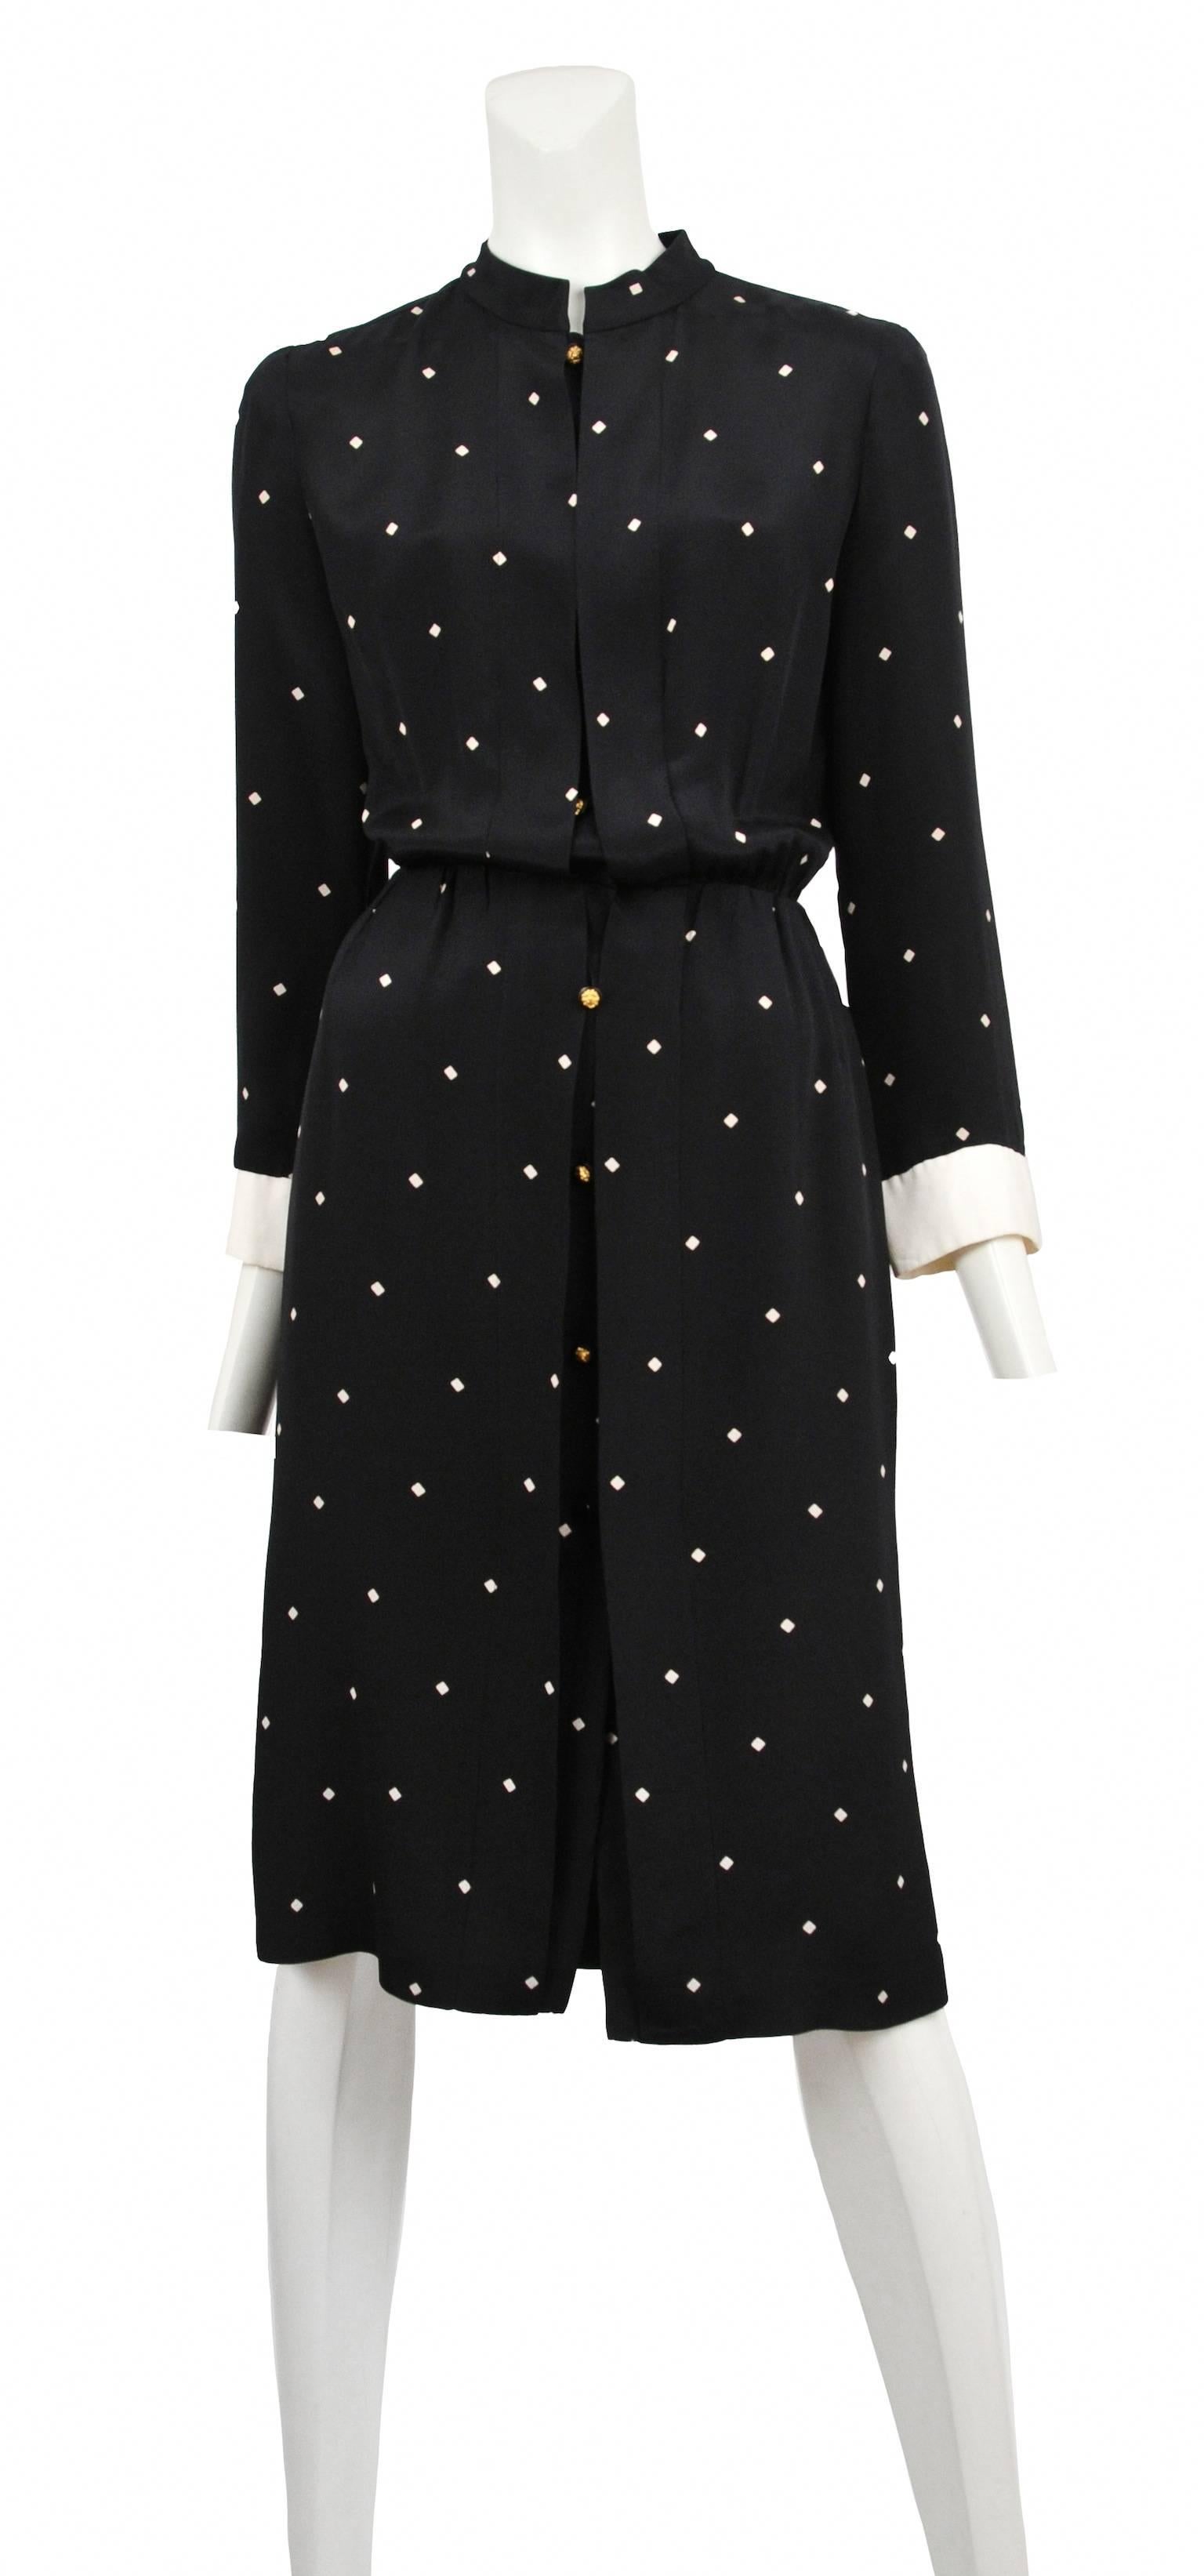 Vintage Chanel black silk secretary dress with diamond dot print and white cream silk cuffs with gold lion buttons. Soft pleats on front and back panel.

Please contact us for additional photos.